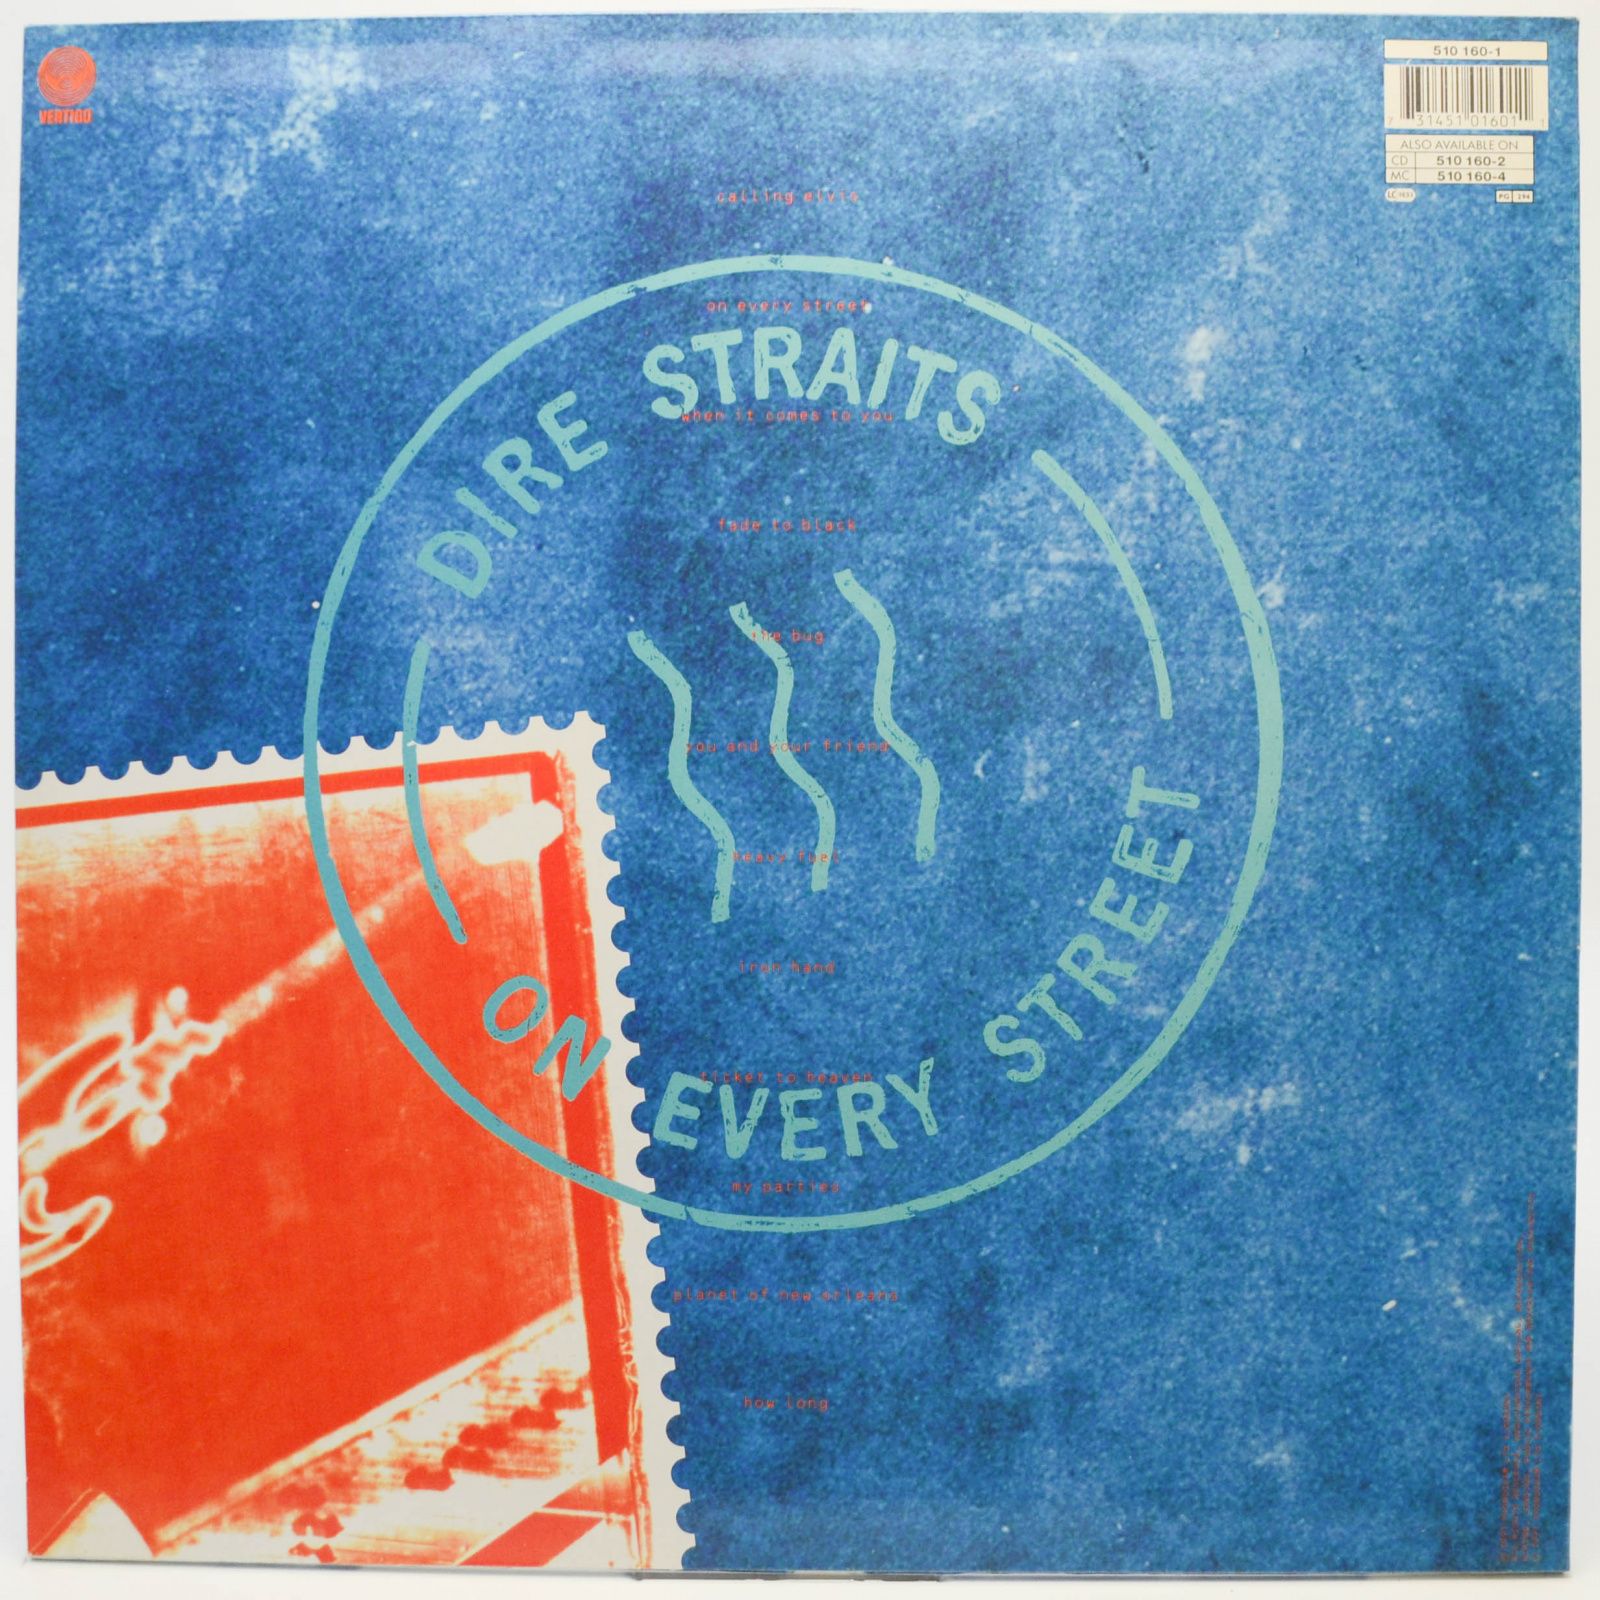 Dire Straits — On Every Street, 1991